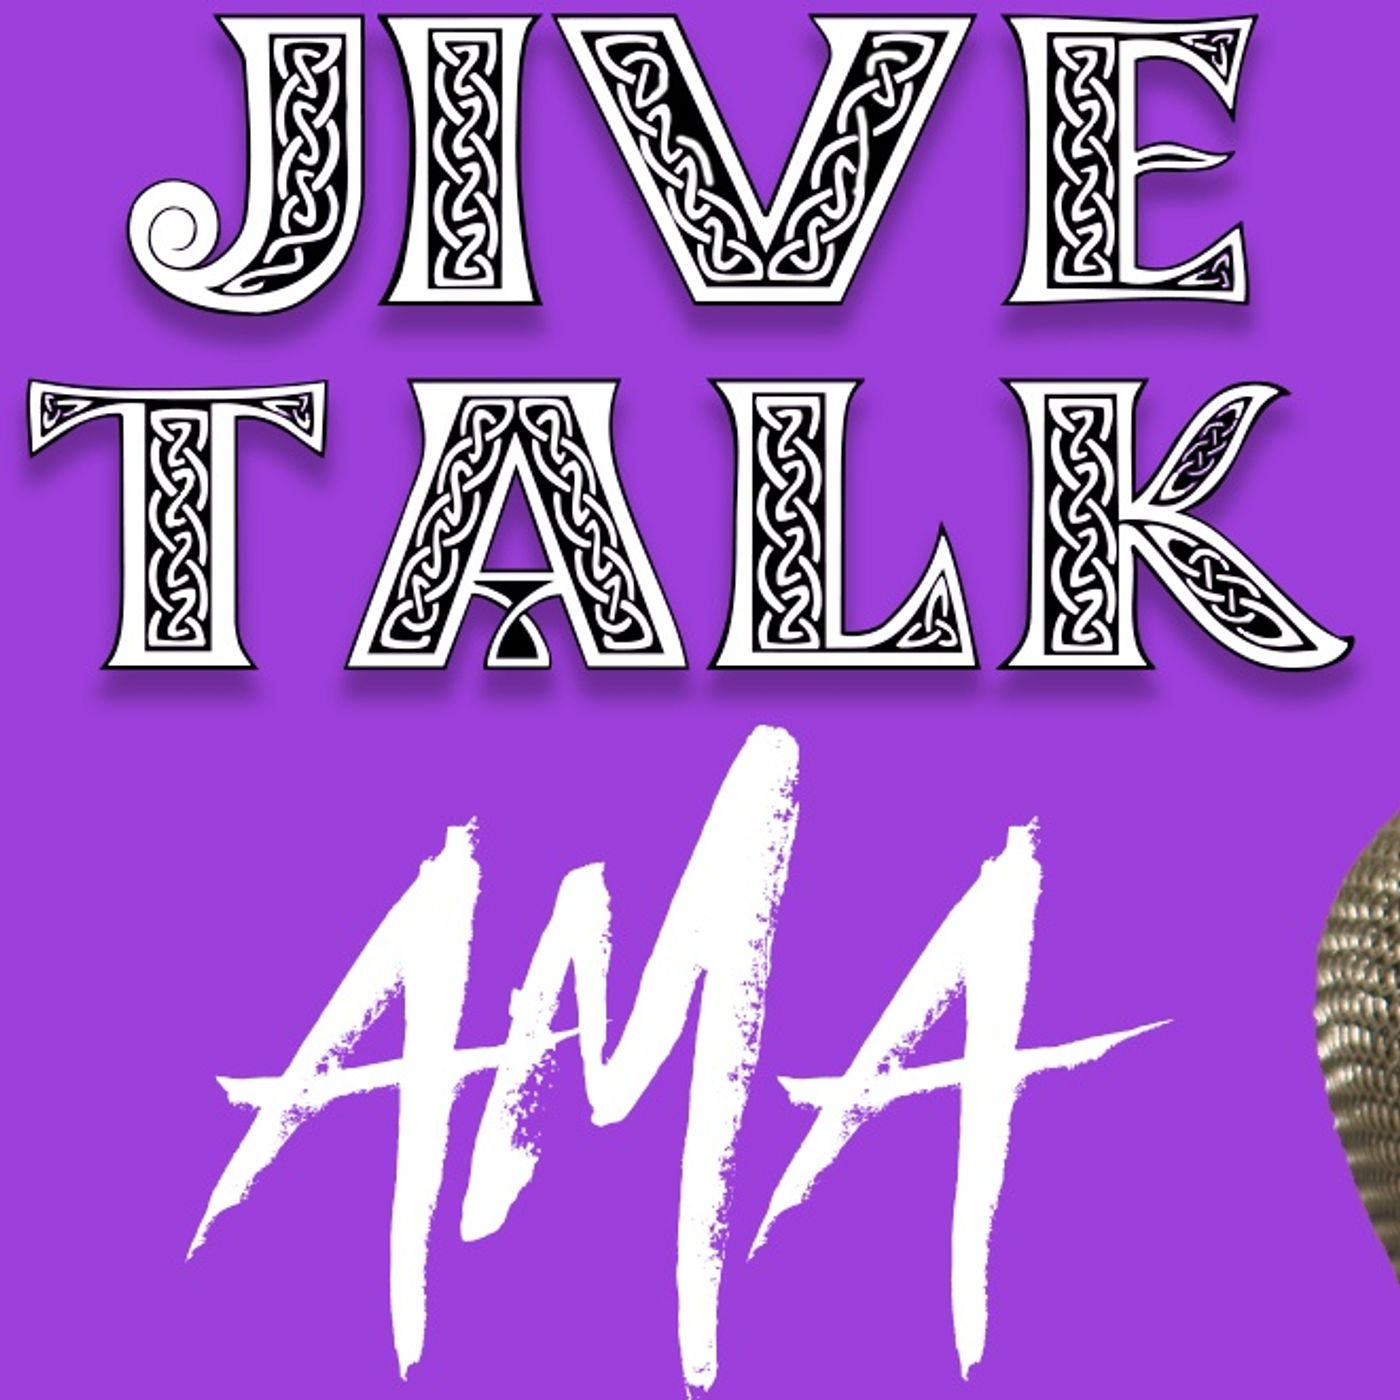 Ask Me Anything! - Survive the Jive question time